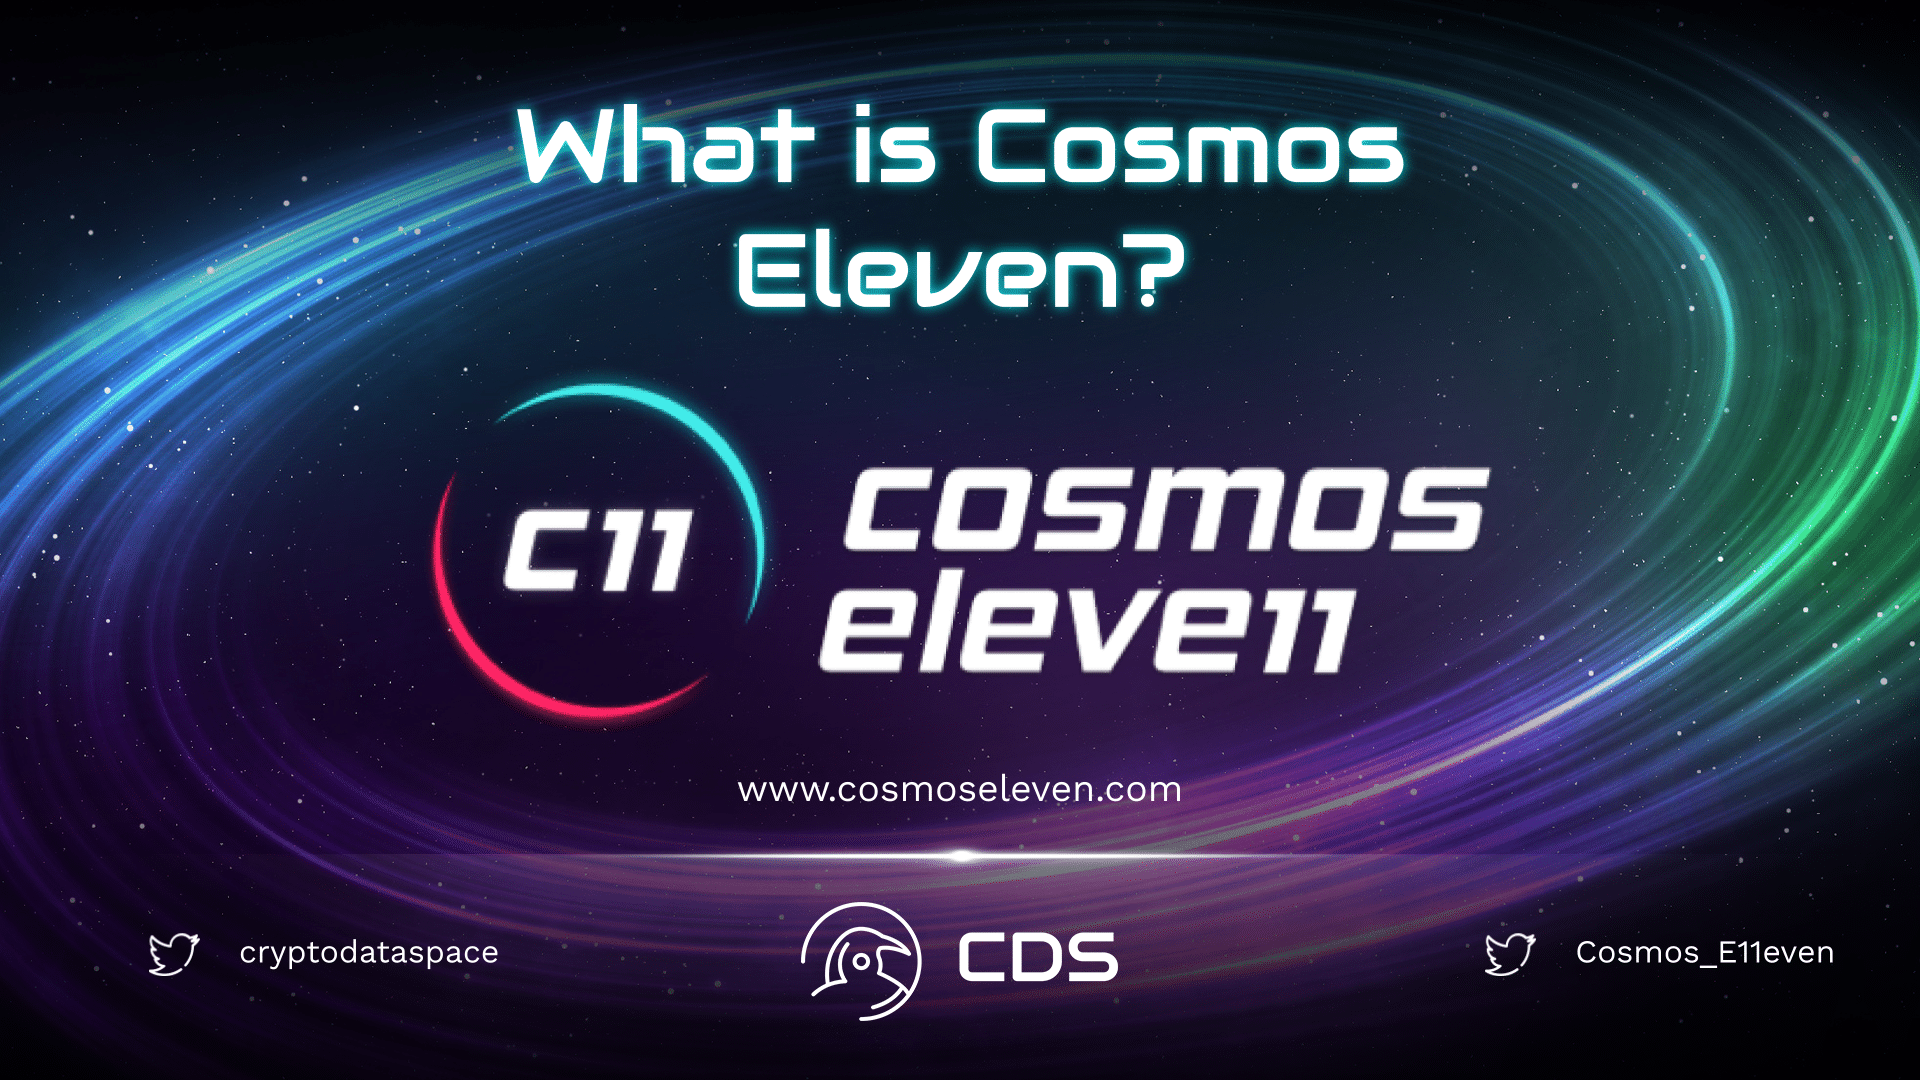 What is Cosmos Eleven?